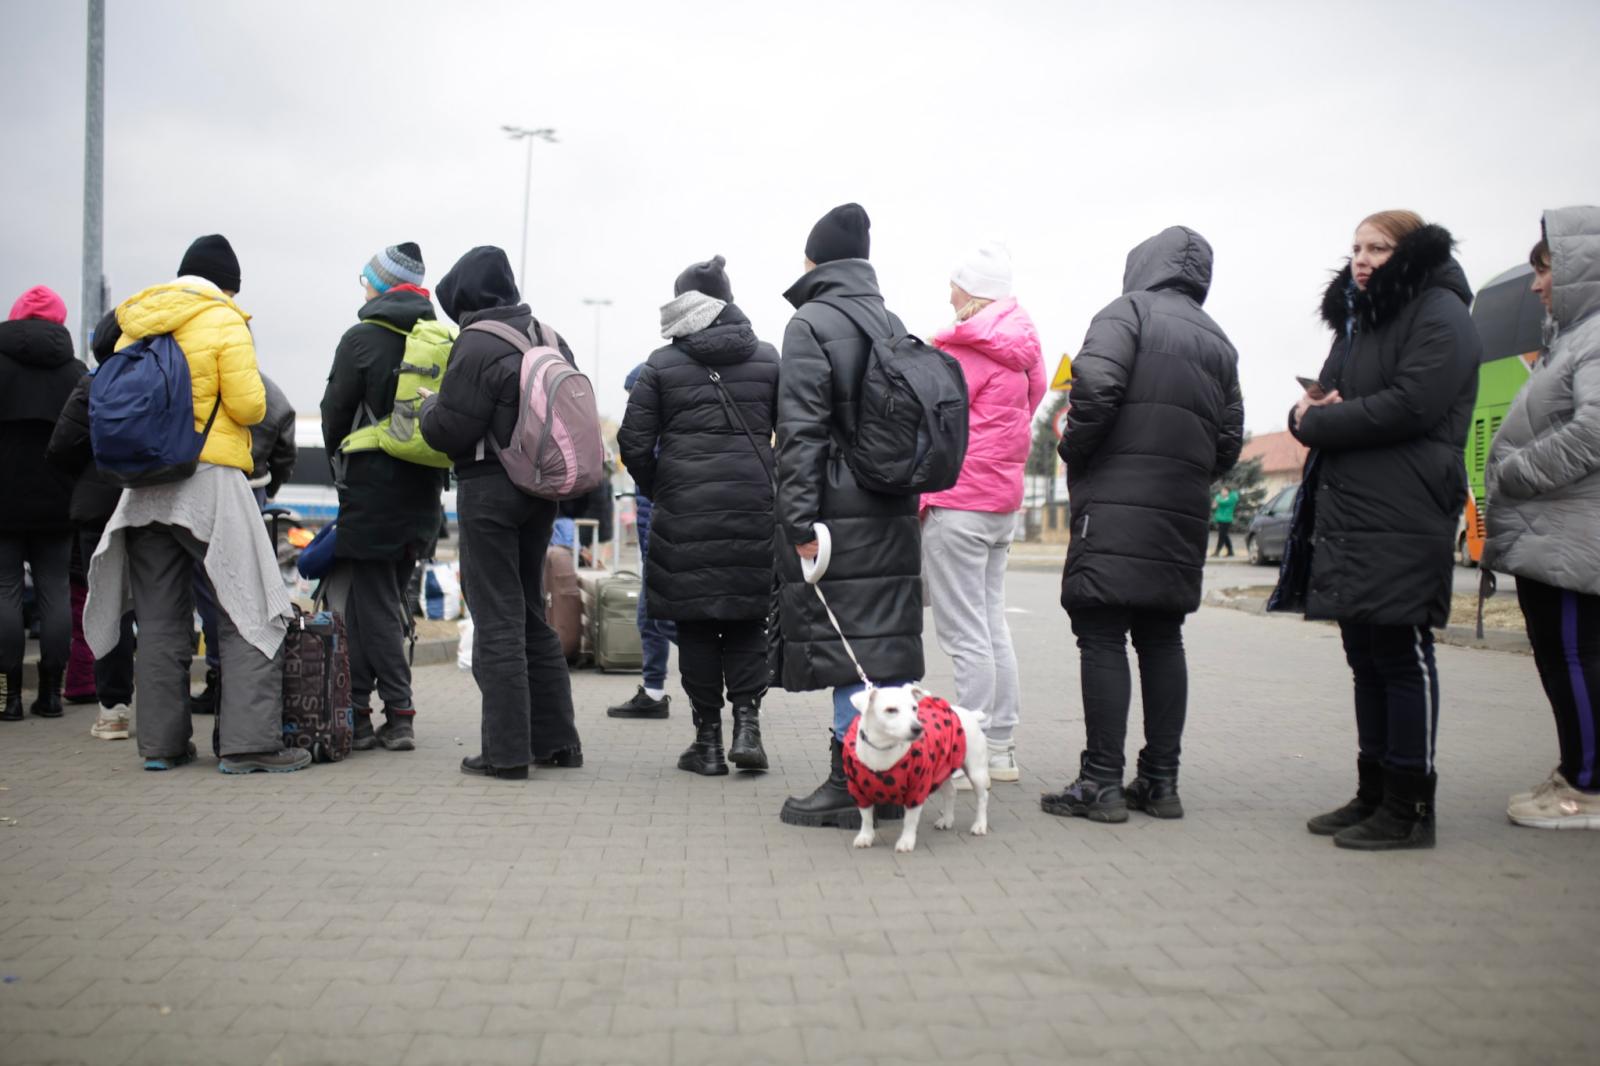 Refugees from Ukraine waiting to travel to European Countries. Photo by Gian Marco Benedetto